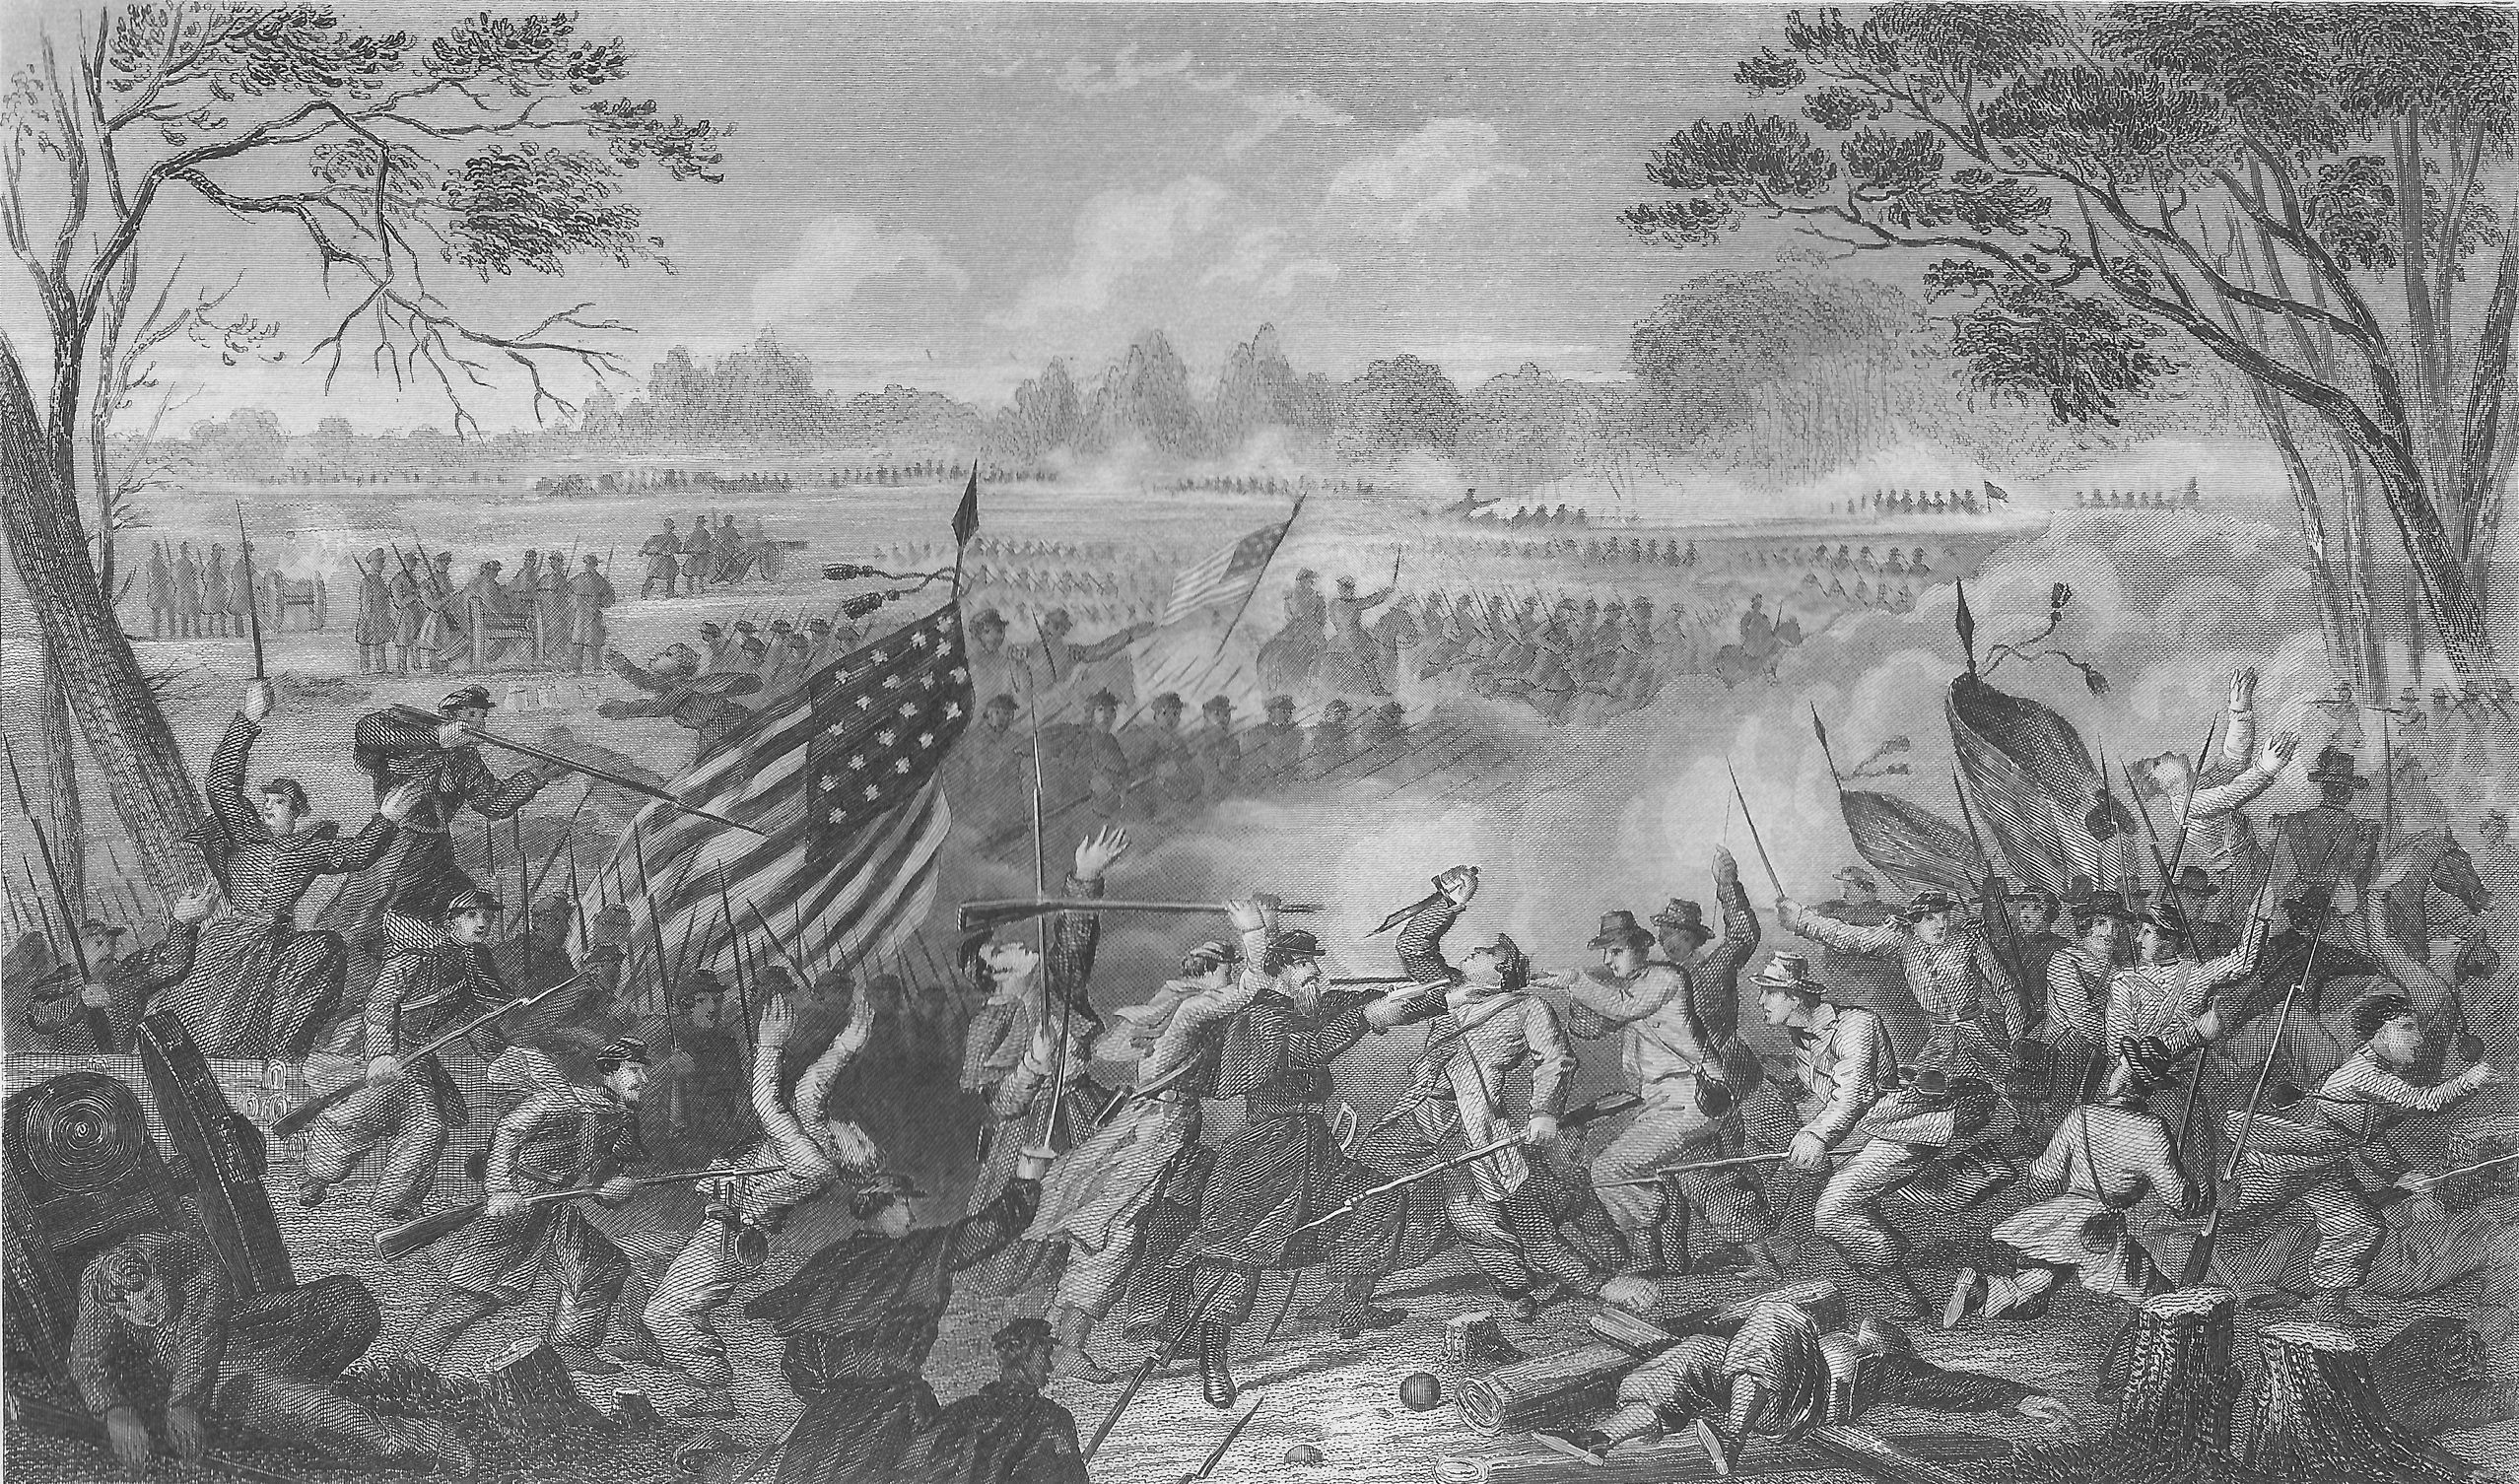 Reckoning with the past: the Civil War and its role in current